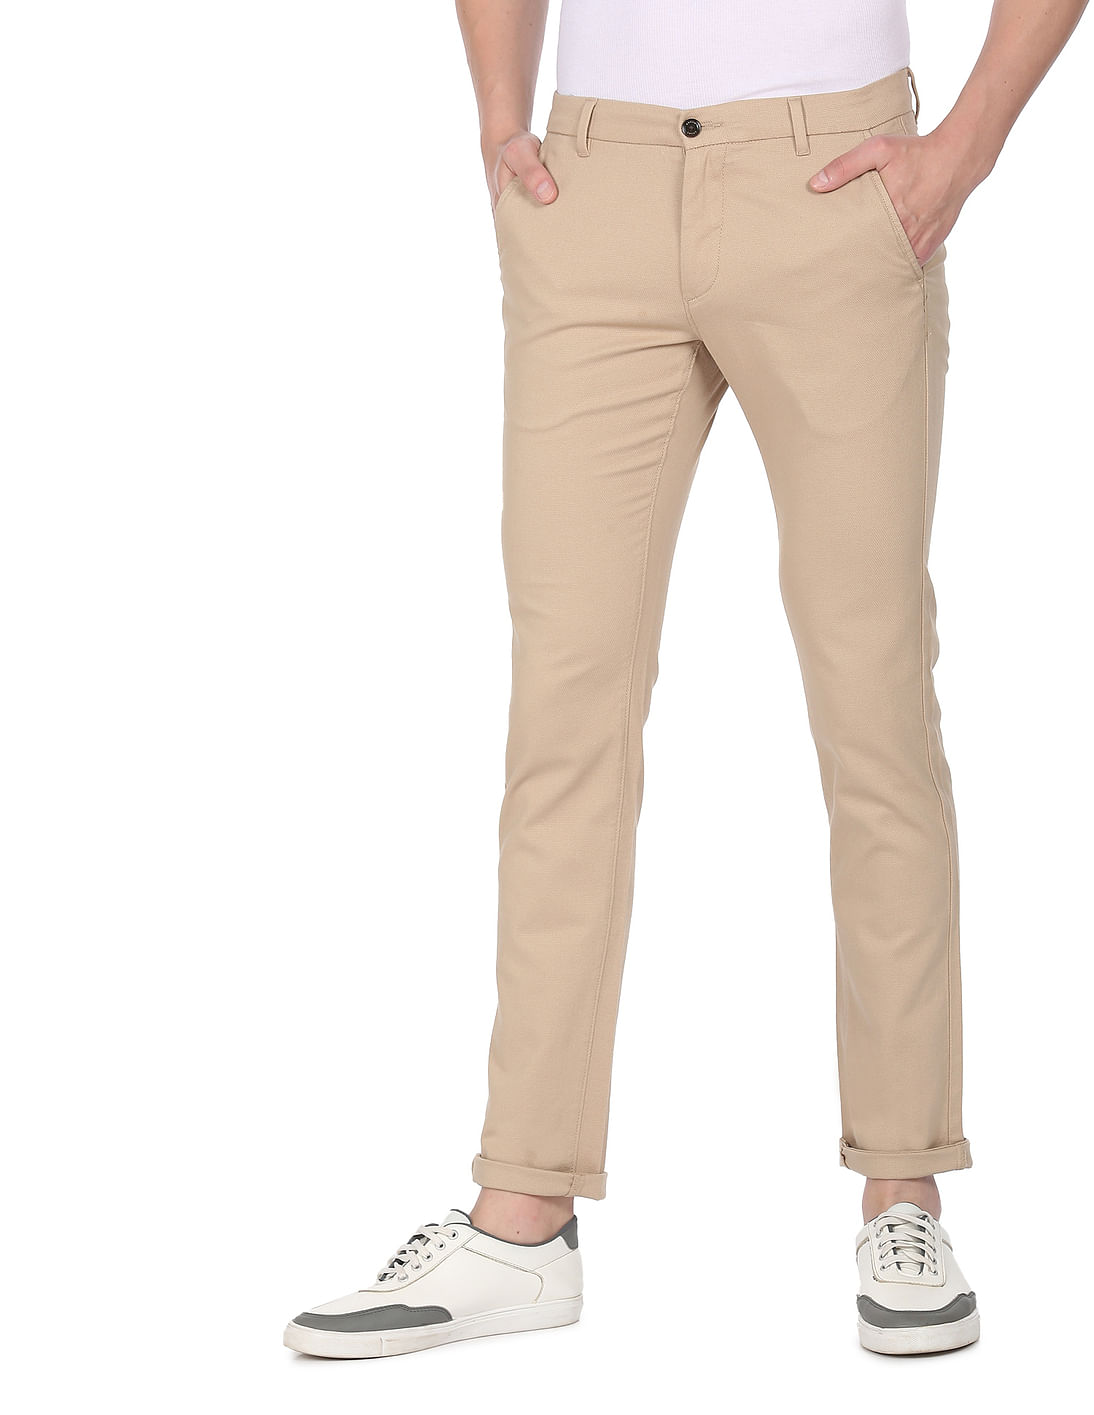 Buy Arrow Sports Low Rise Bronson Slim Fit Trousers - NNNOW.com